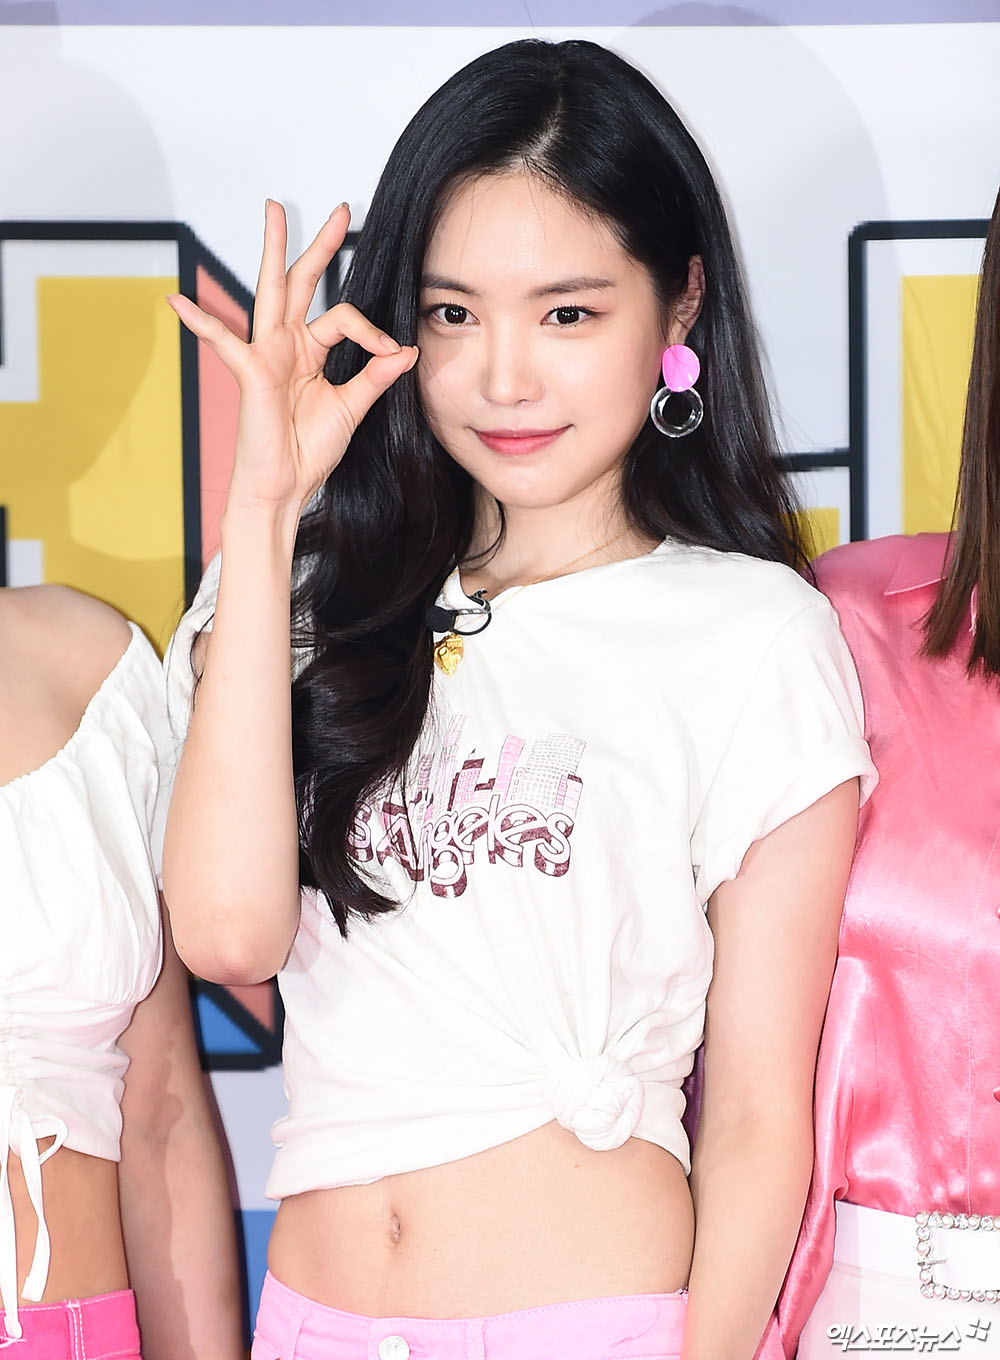 Apink Son Na-eun, who attended the fan meeting Running District commemorating the 9th anniversary of SBS Running Man held at Ewha Womens University Auditorium in Daehyun-dong, Seoul on the afternoon of the 26th, has photo time.